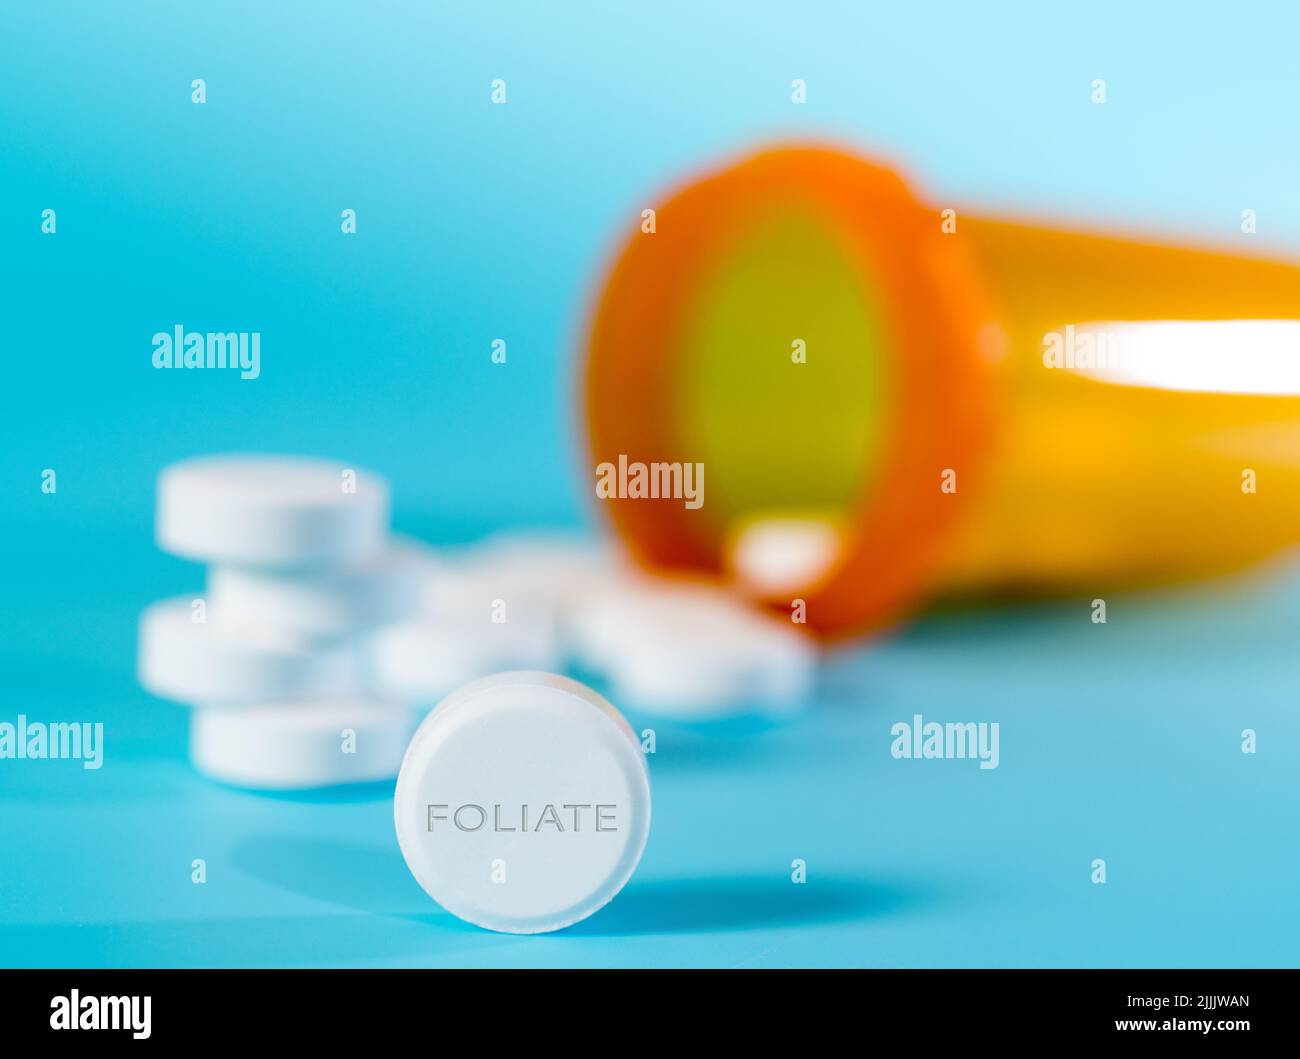 Folate is a B-vitamin help make DNA and other genetic material, body also needs folate for your cells to divide. Stock Photo